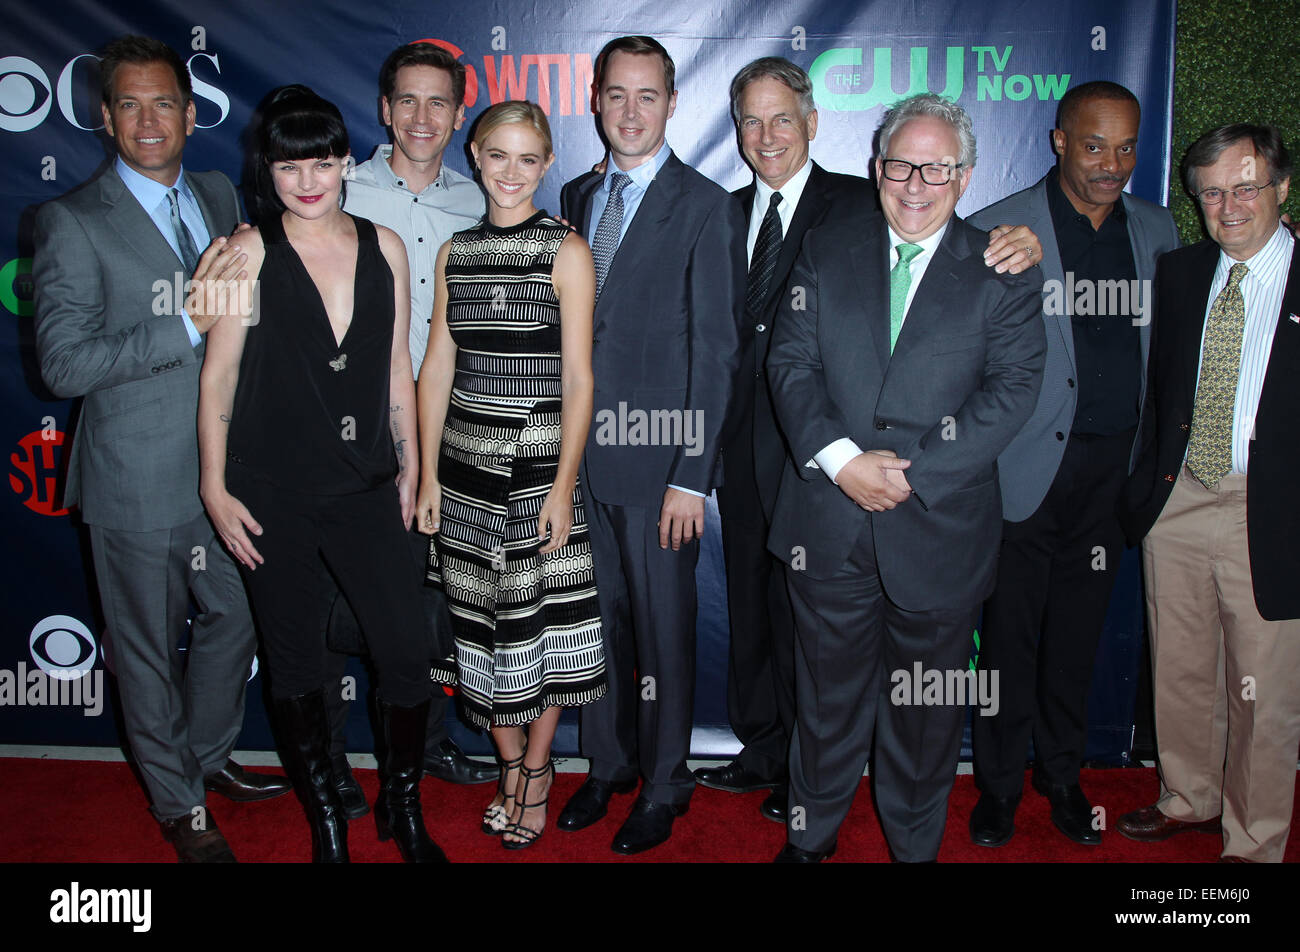 2014 Television Critics Association Summer Press Tour - CBS, CW And Showtime Party  Featuring: Michael Weatherly,Pauley Perrette,Brian Dietzen,Emily Wickersham,Sean Murray,Mark Harmon,Rocky Carroll,David McCallum Where: West Hollywood, California, United Stock Photo